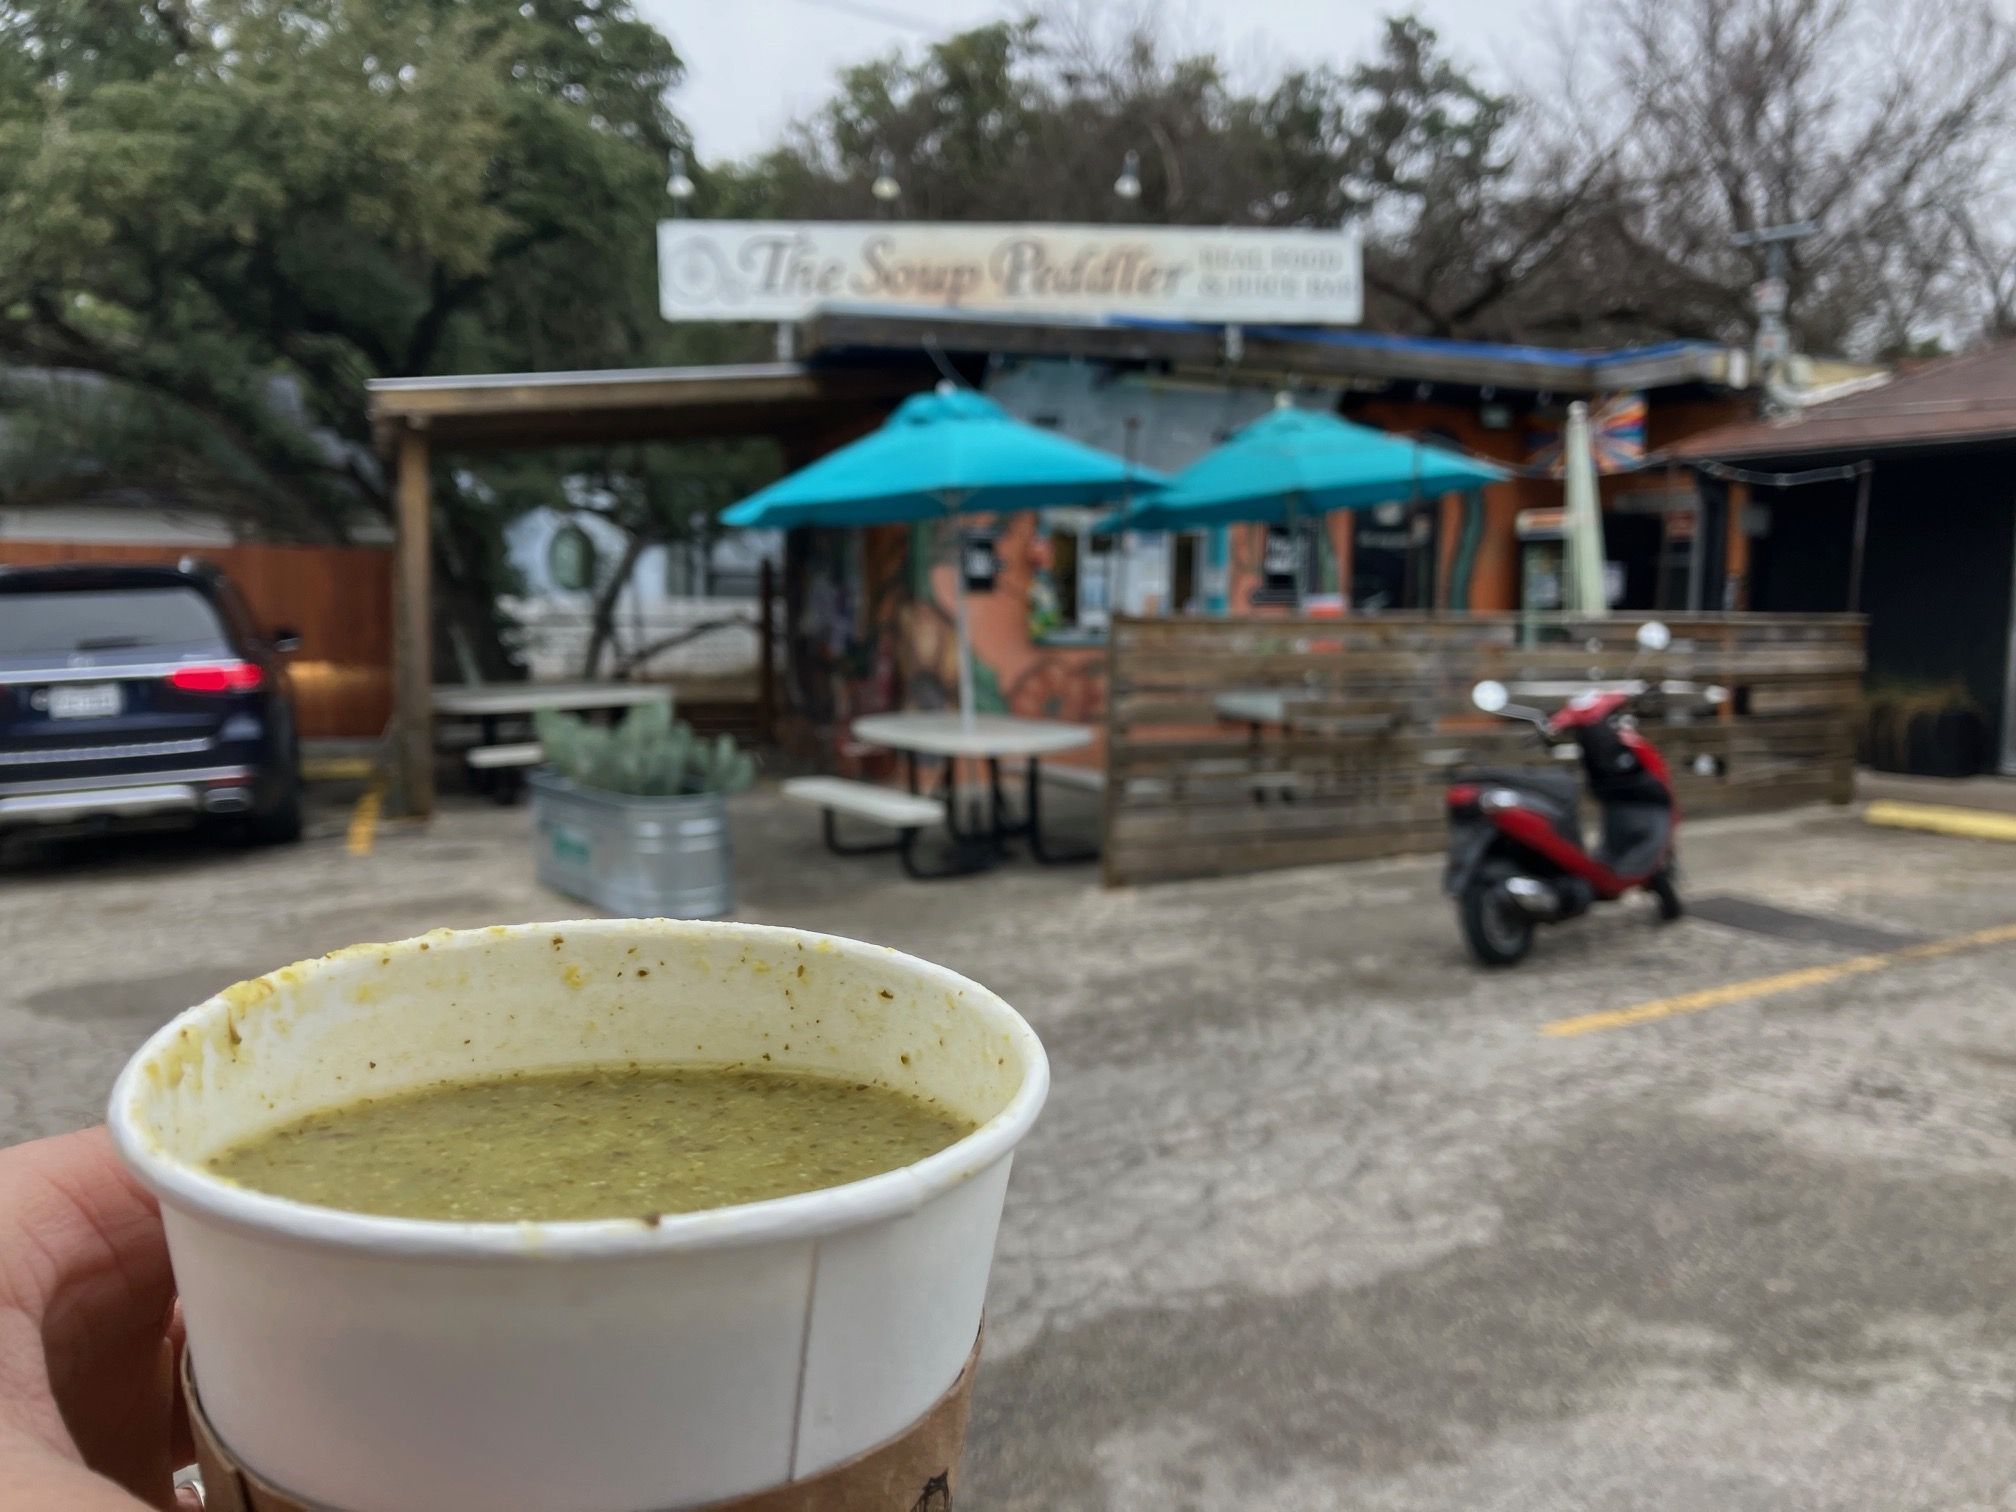 A cup of green broth from Soup Peddler.